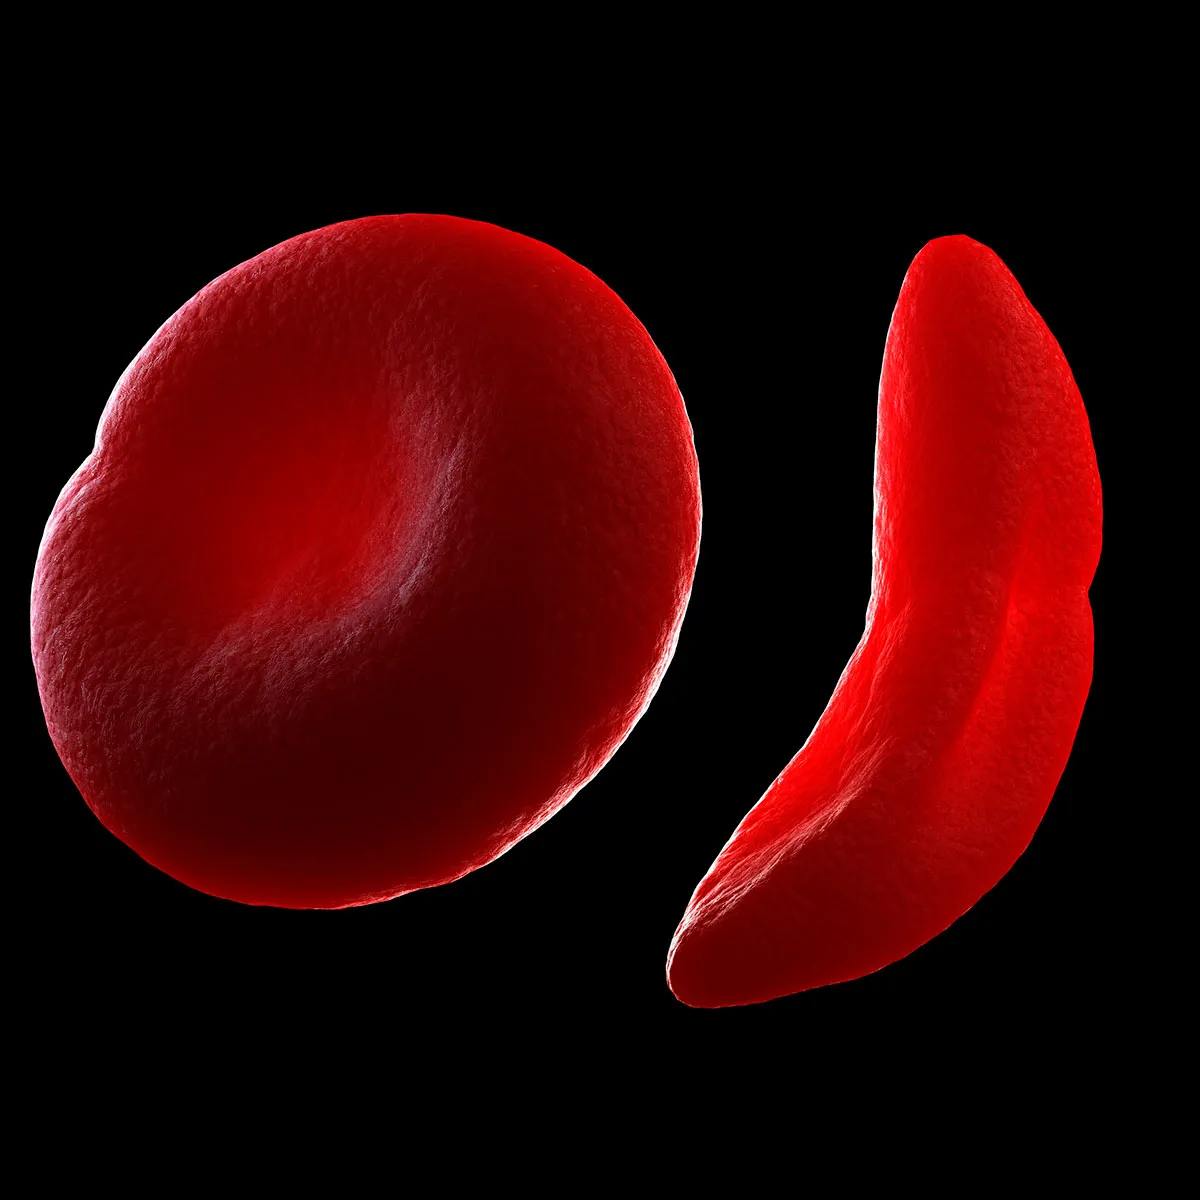 A healthy blood cell and a sickle-shaped blood cell © Getty Images